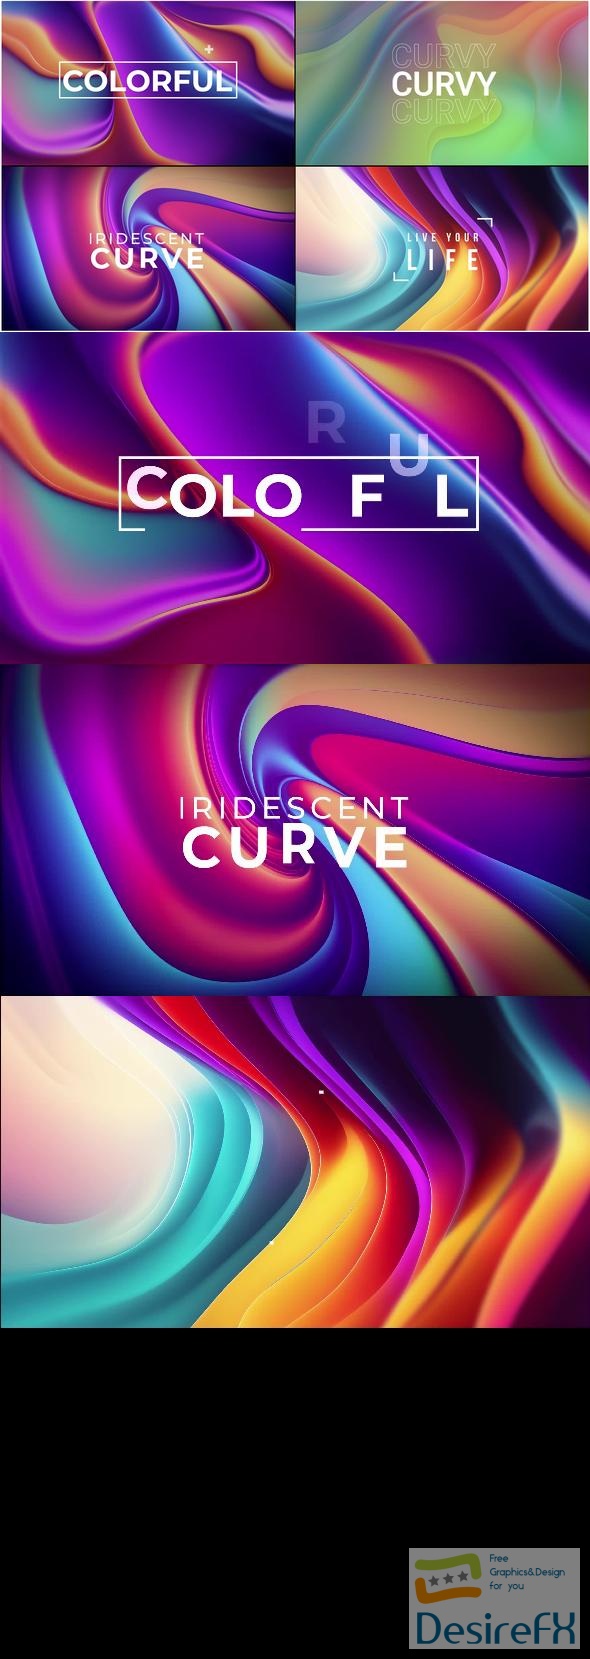 VideoHive Colorful Curves Titles 42788119